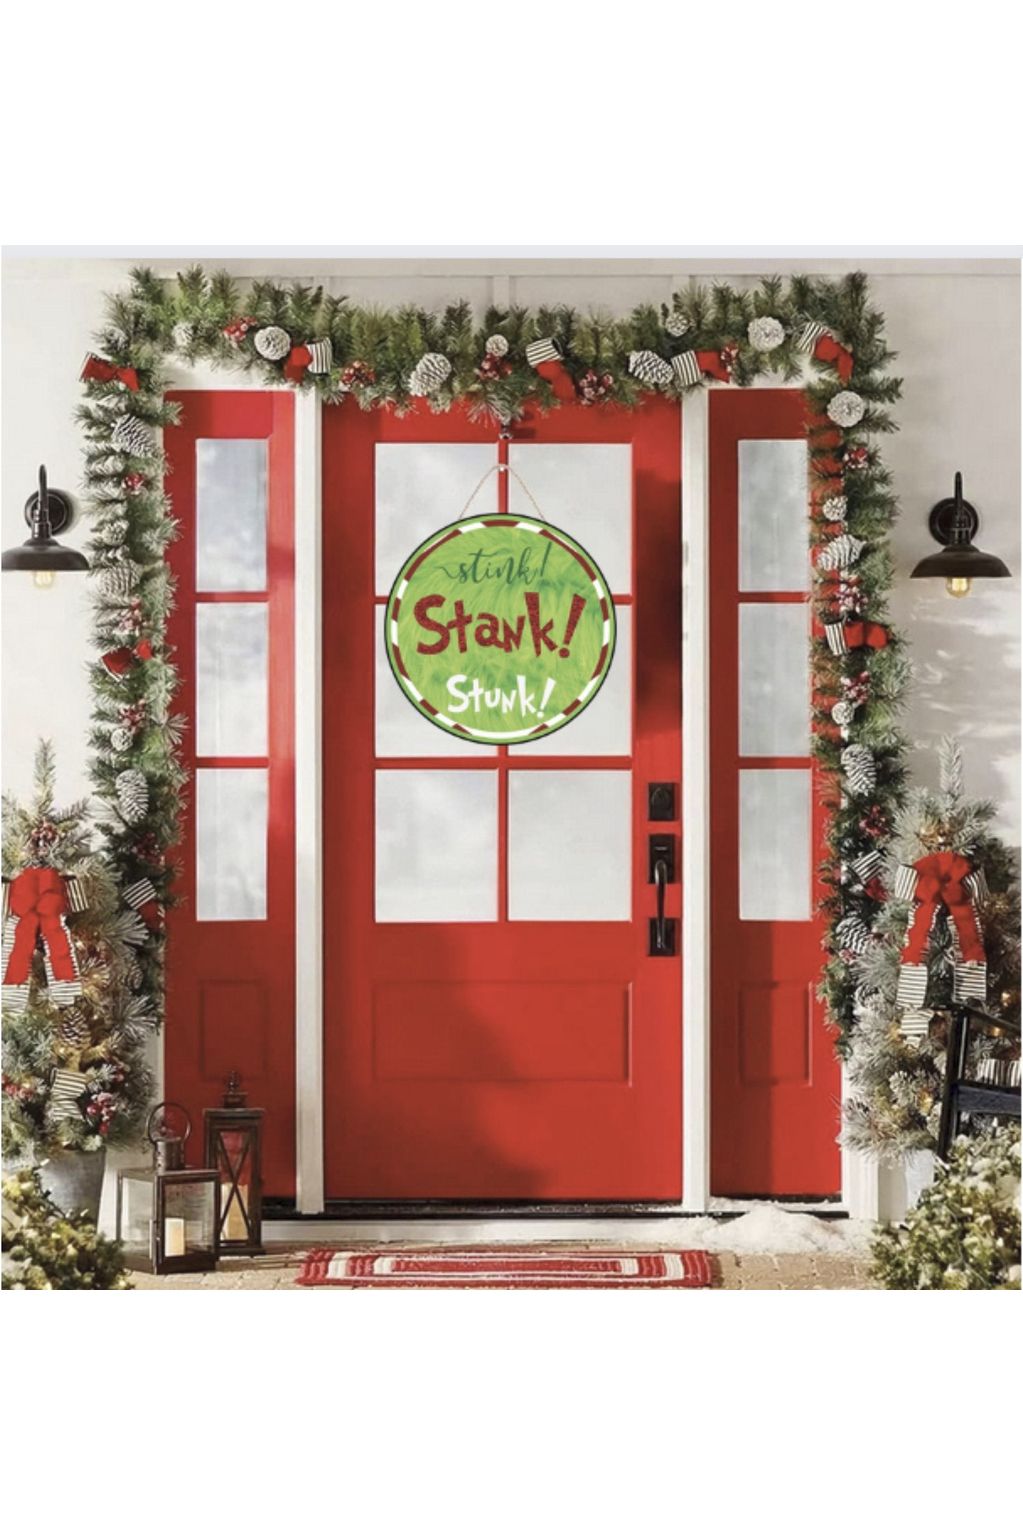 Stink Stank Stunk Christmas Sign - Wreath Enhancement - Michelle's aDOORable Creations - Signature Signs